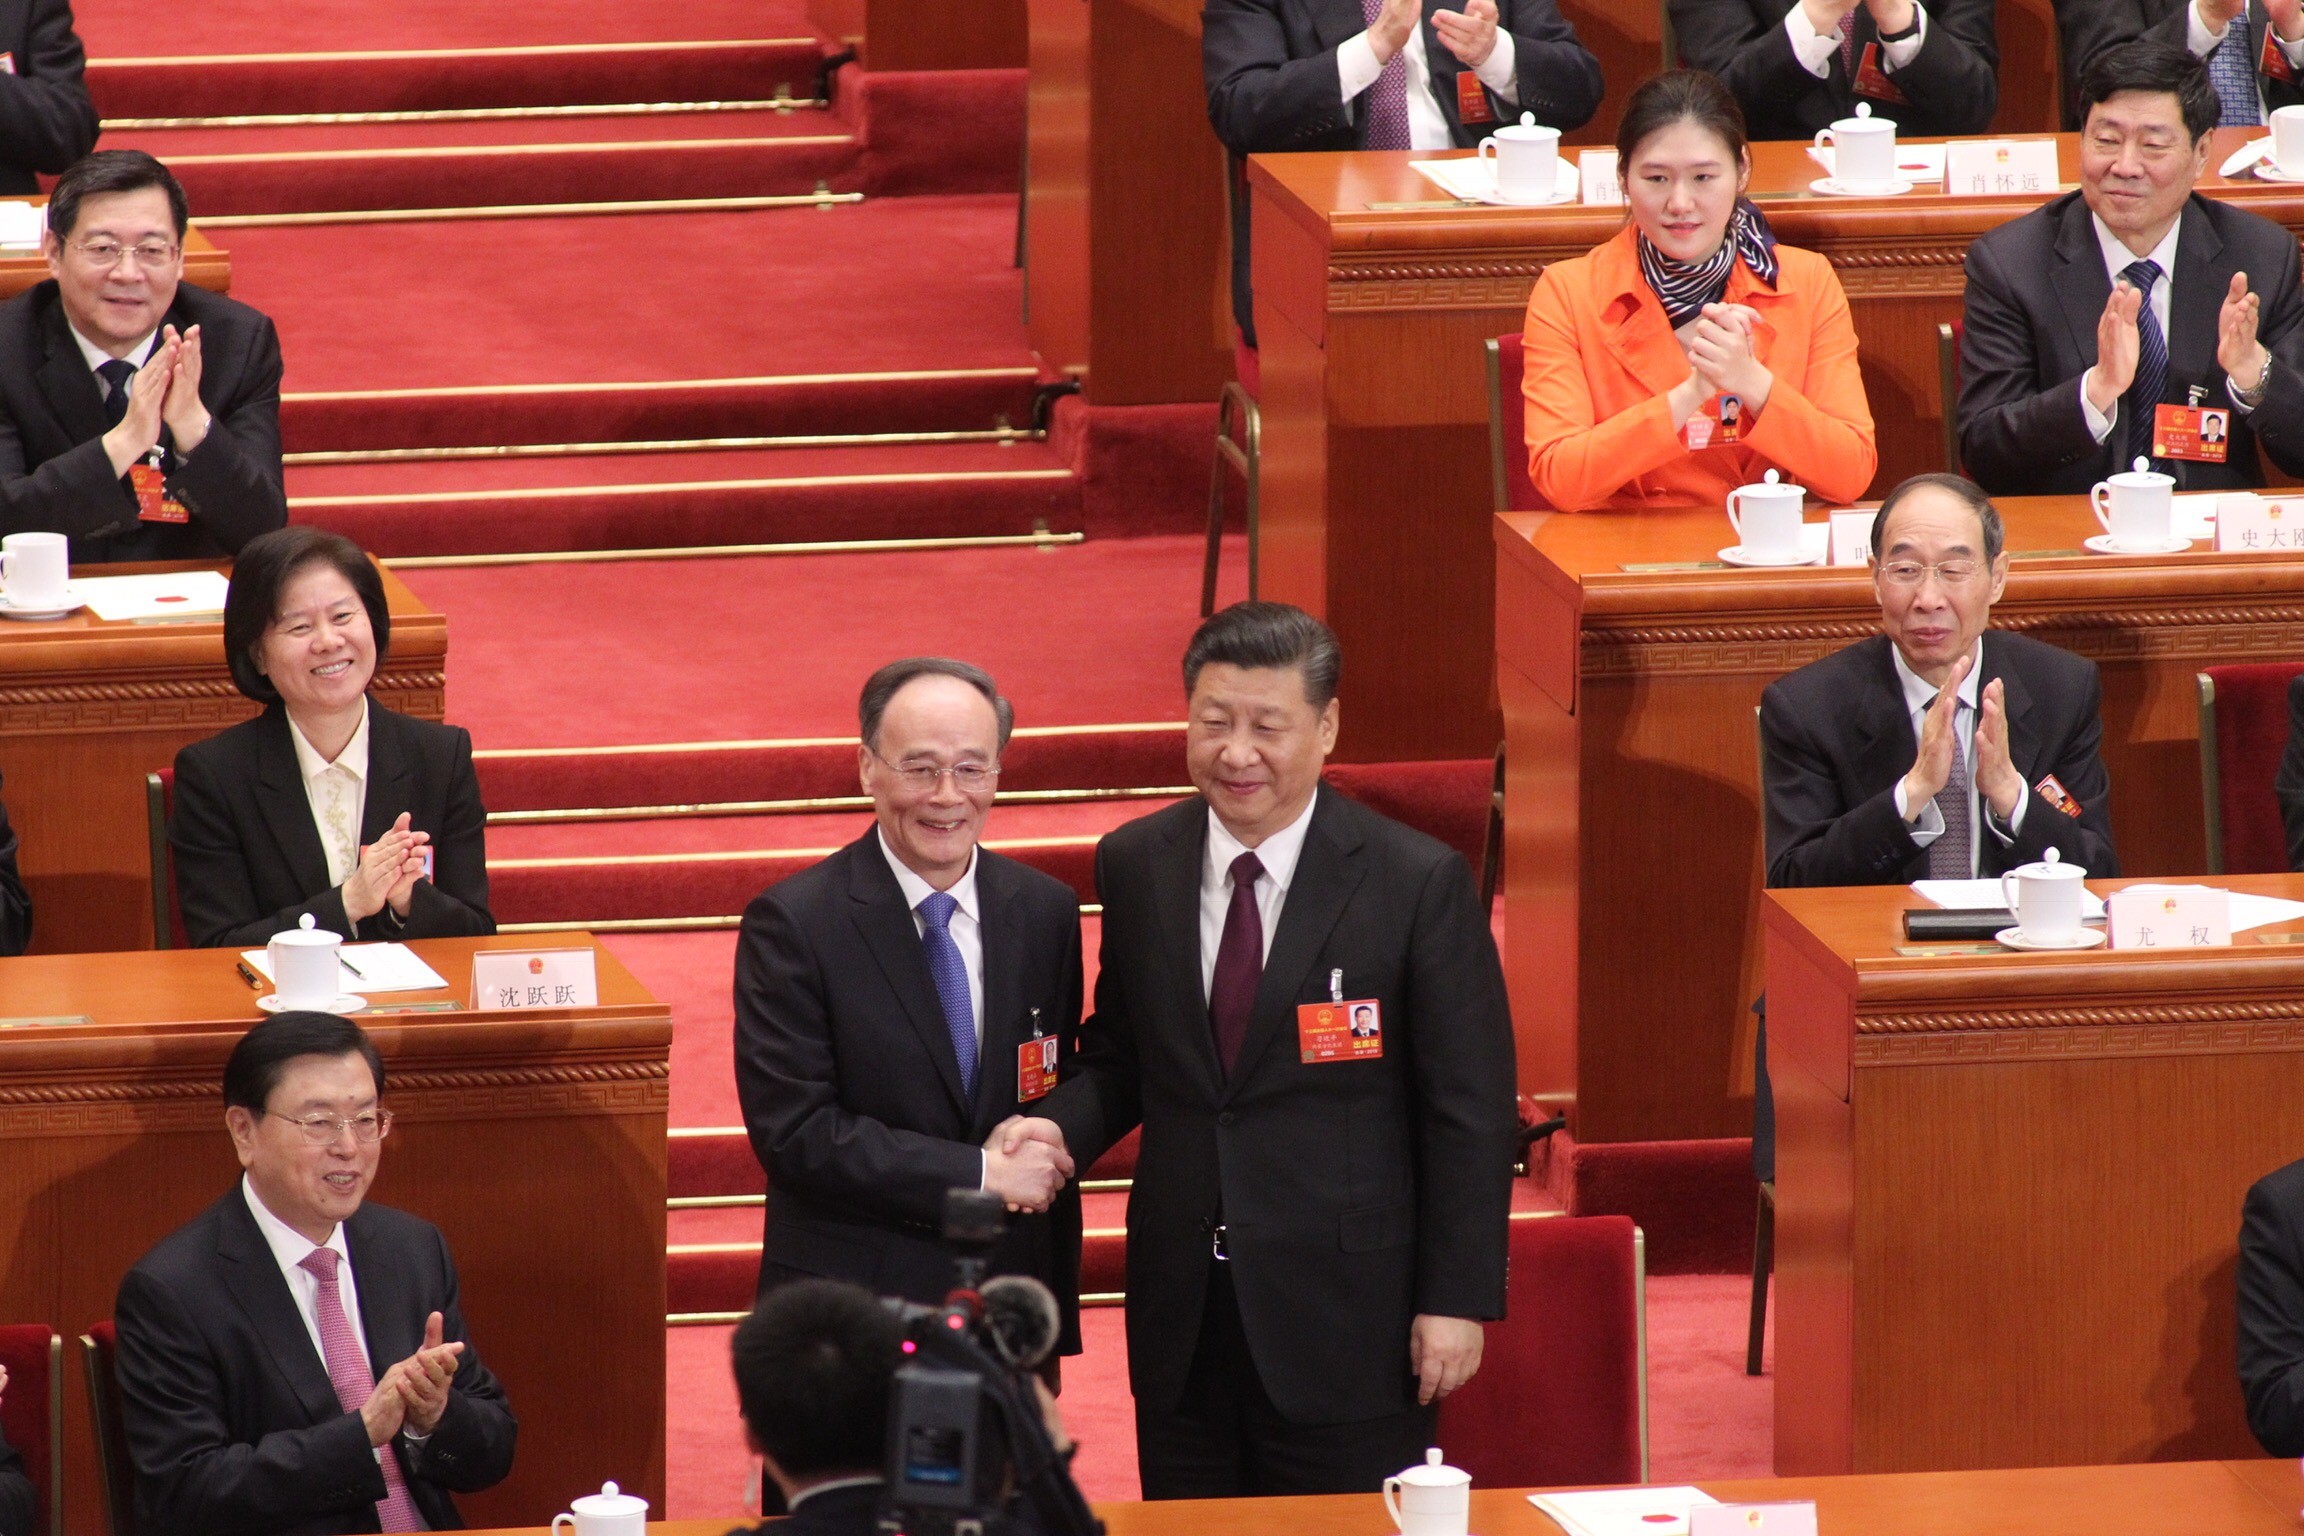 Wang Qishan (left) shakes hands with President Xi Jinping after being voted in as China’s new vice-president. Photo: Simon Song